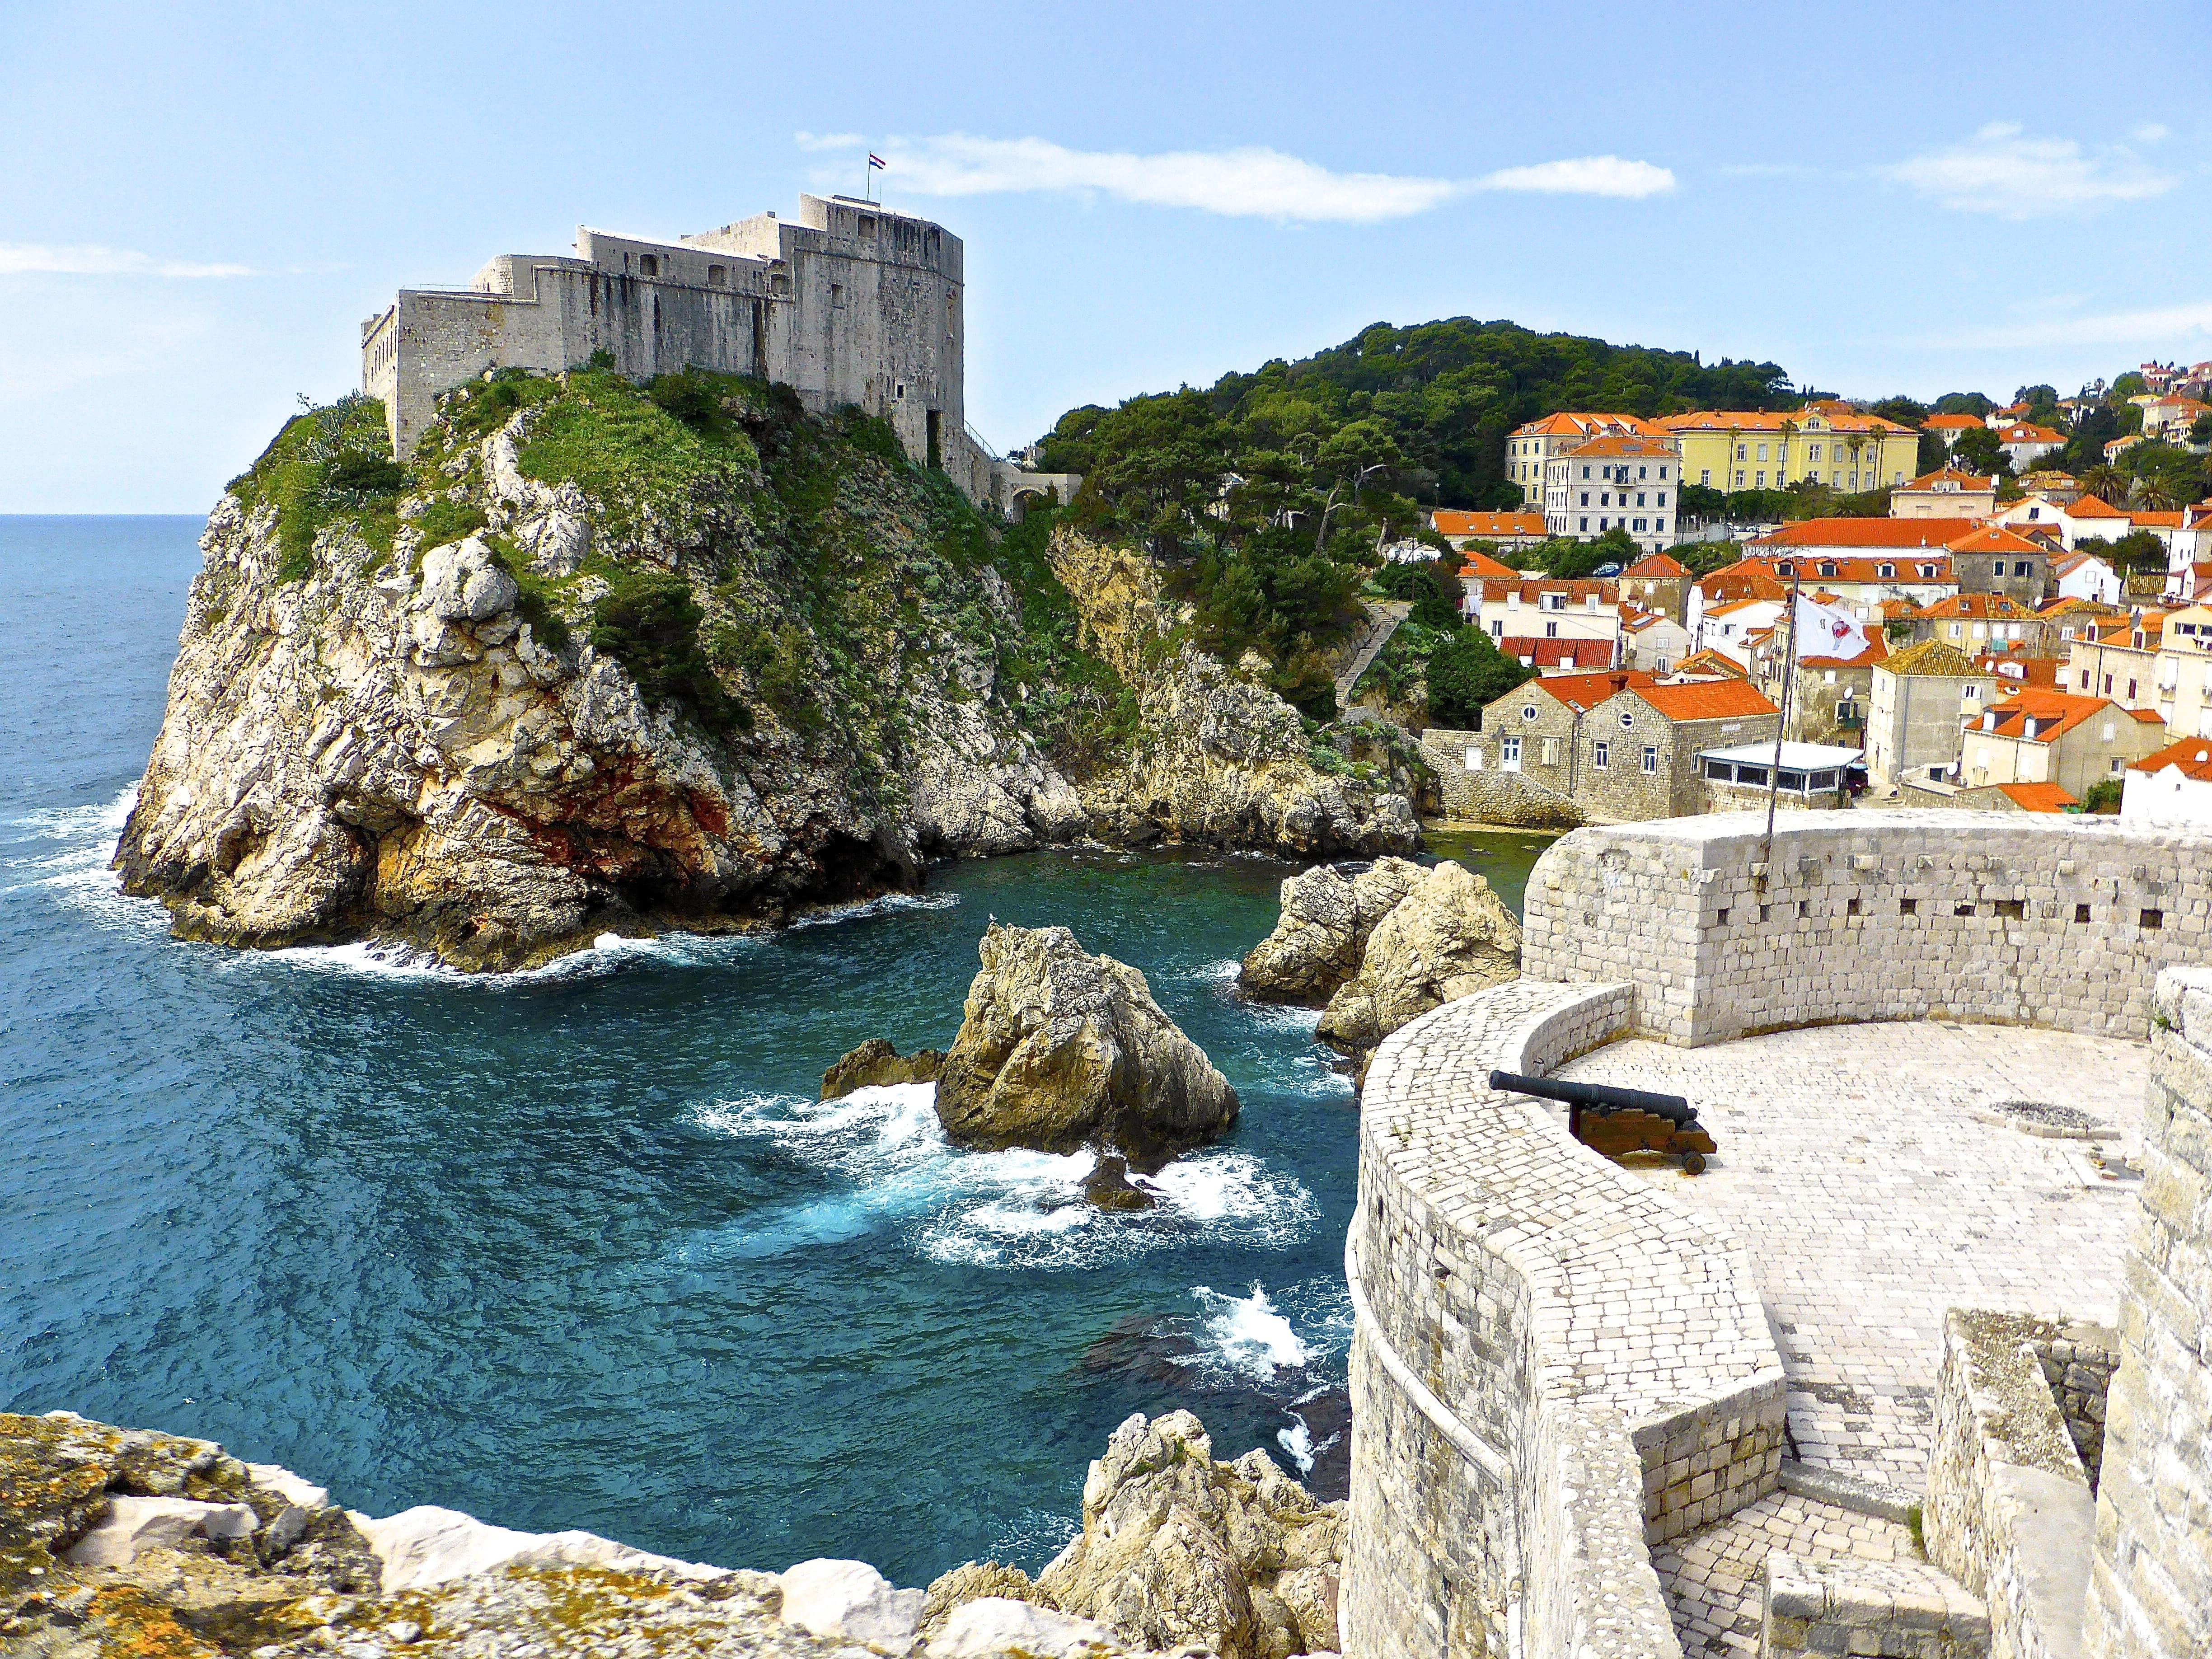 Expect stunning views like this on your family holiday in Dubrovnik